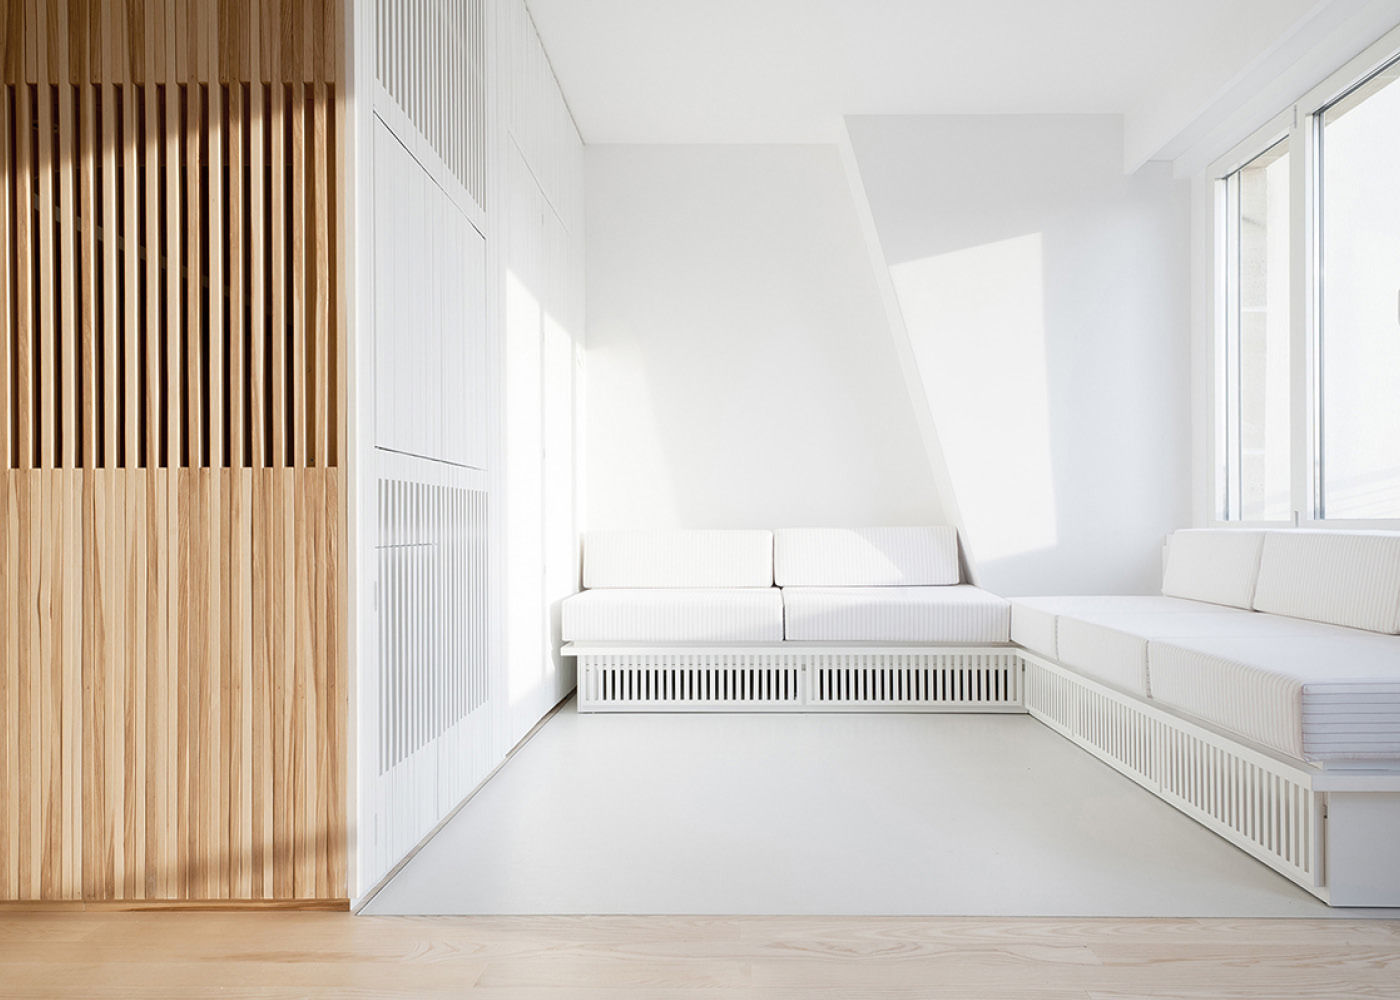 Flat N°4. A small ap, Julien Joly Architecture Julien Joly Architecture Salas de estilo minimalista